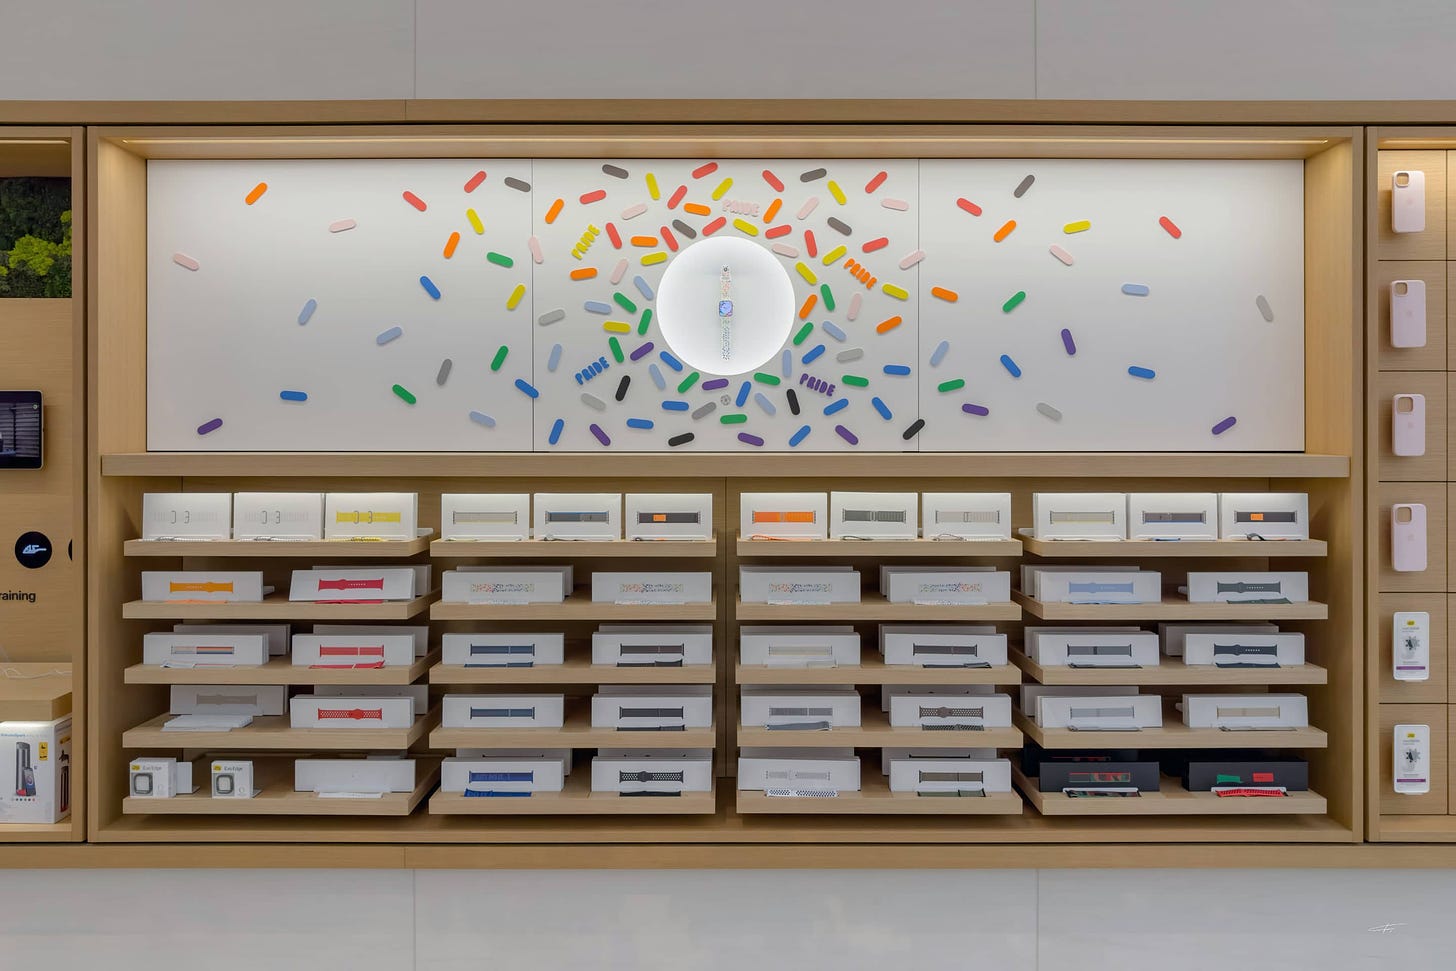 The Apple Watch Pride bay at Apple Rosenthaler Straße. Colorful geometric shapes are set against a white background. A single Apple Watch rests in the center.